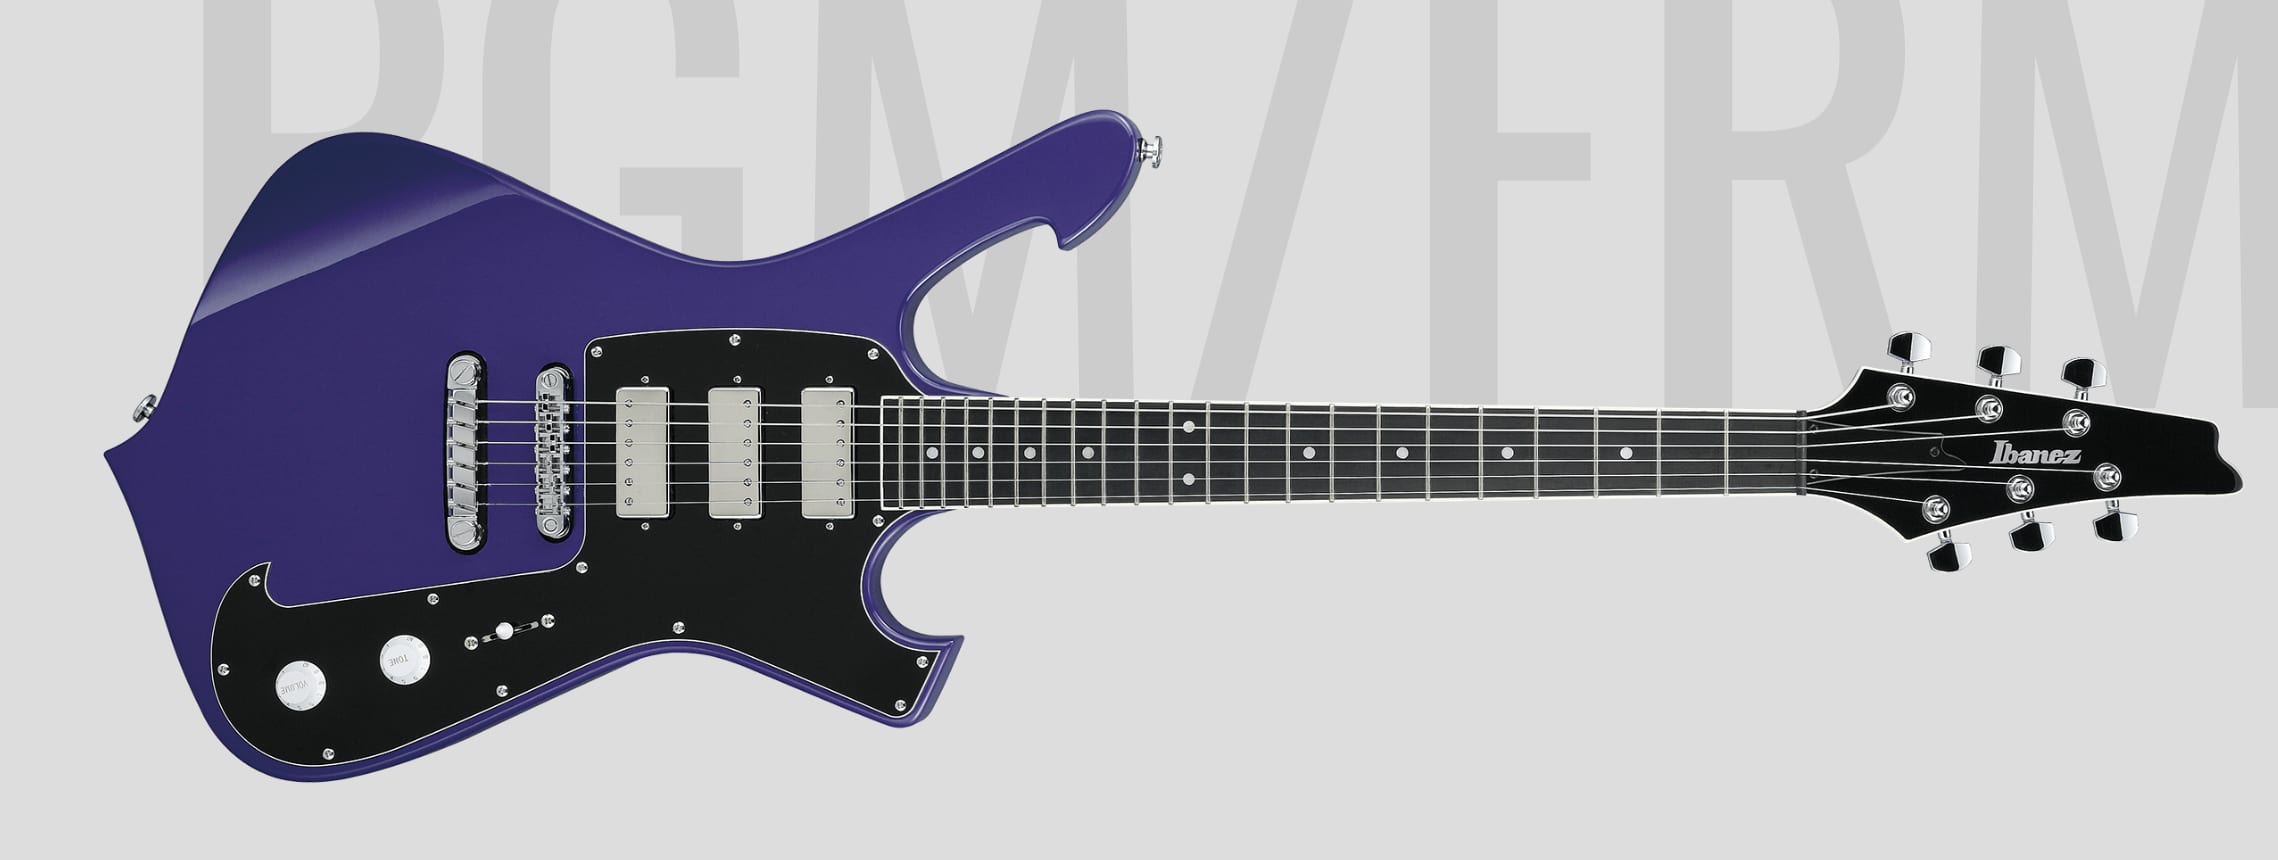 Ibanez Paul Gilbert PGM FRM300 a luscious purple shredder with style